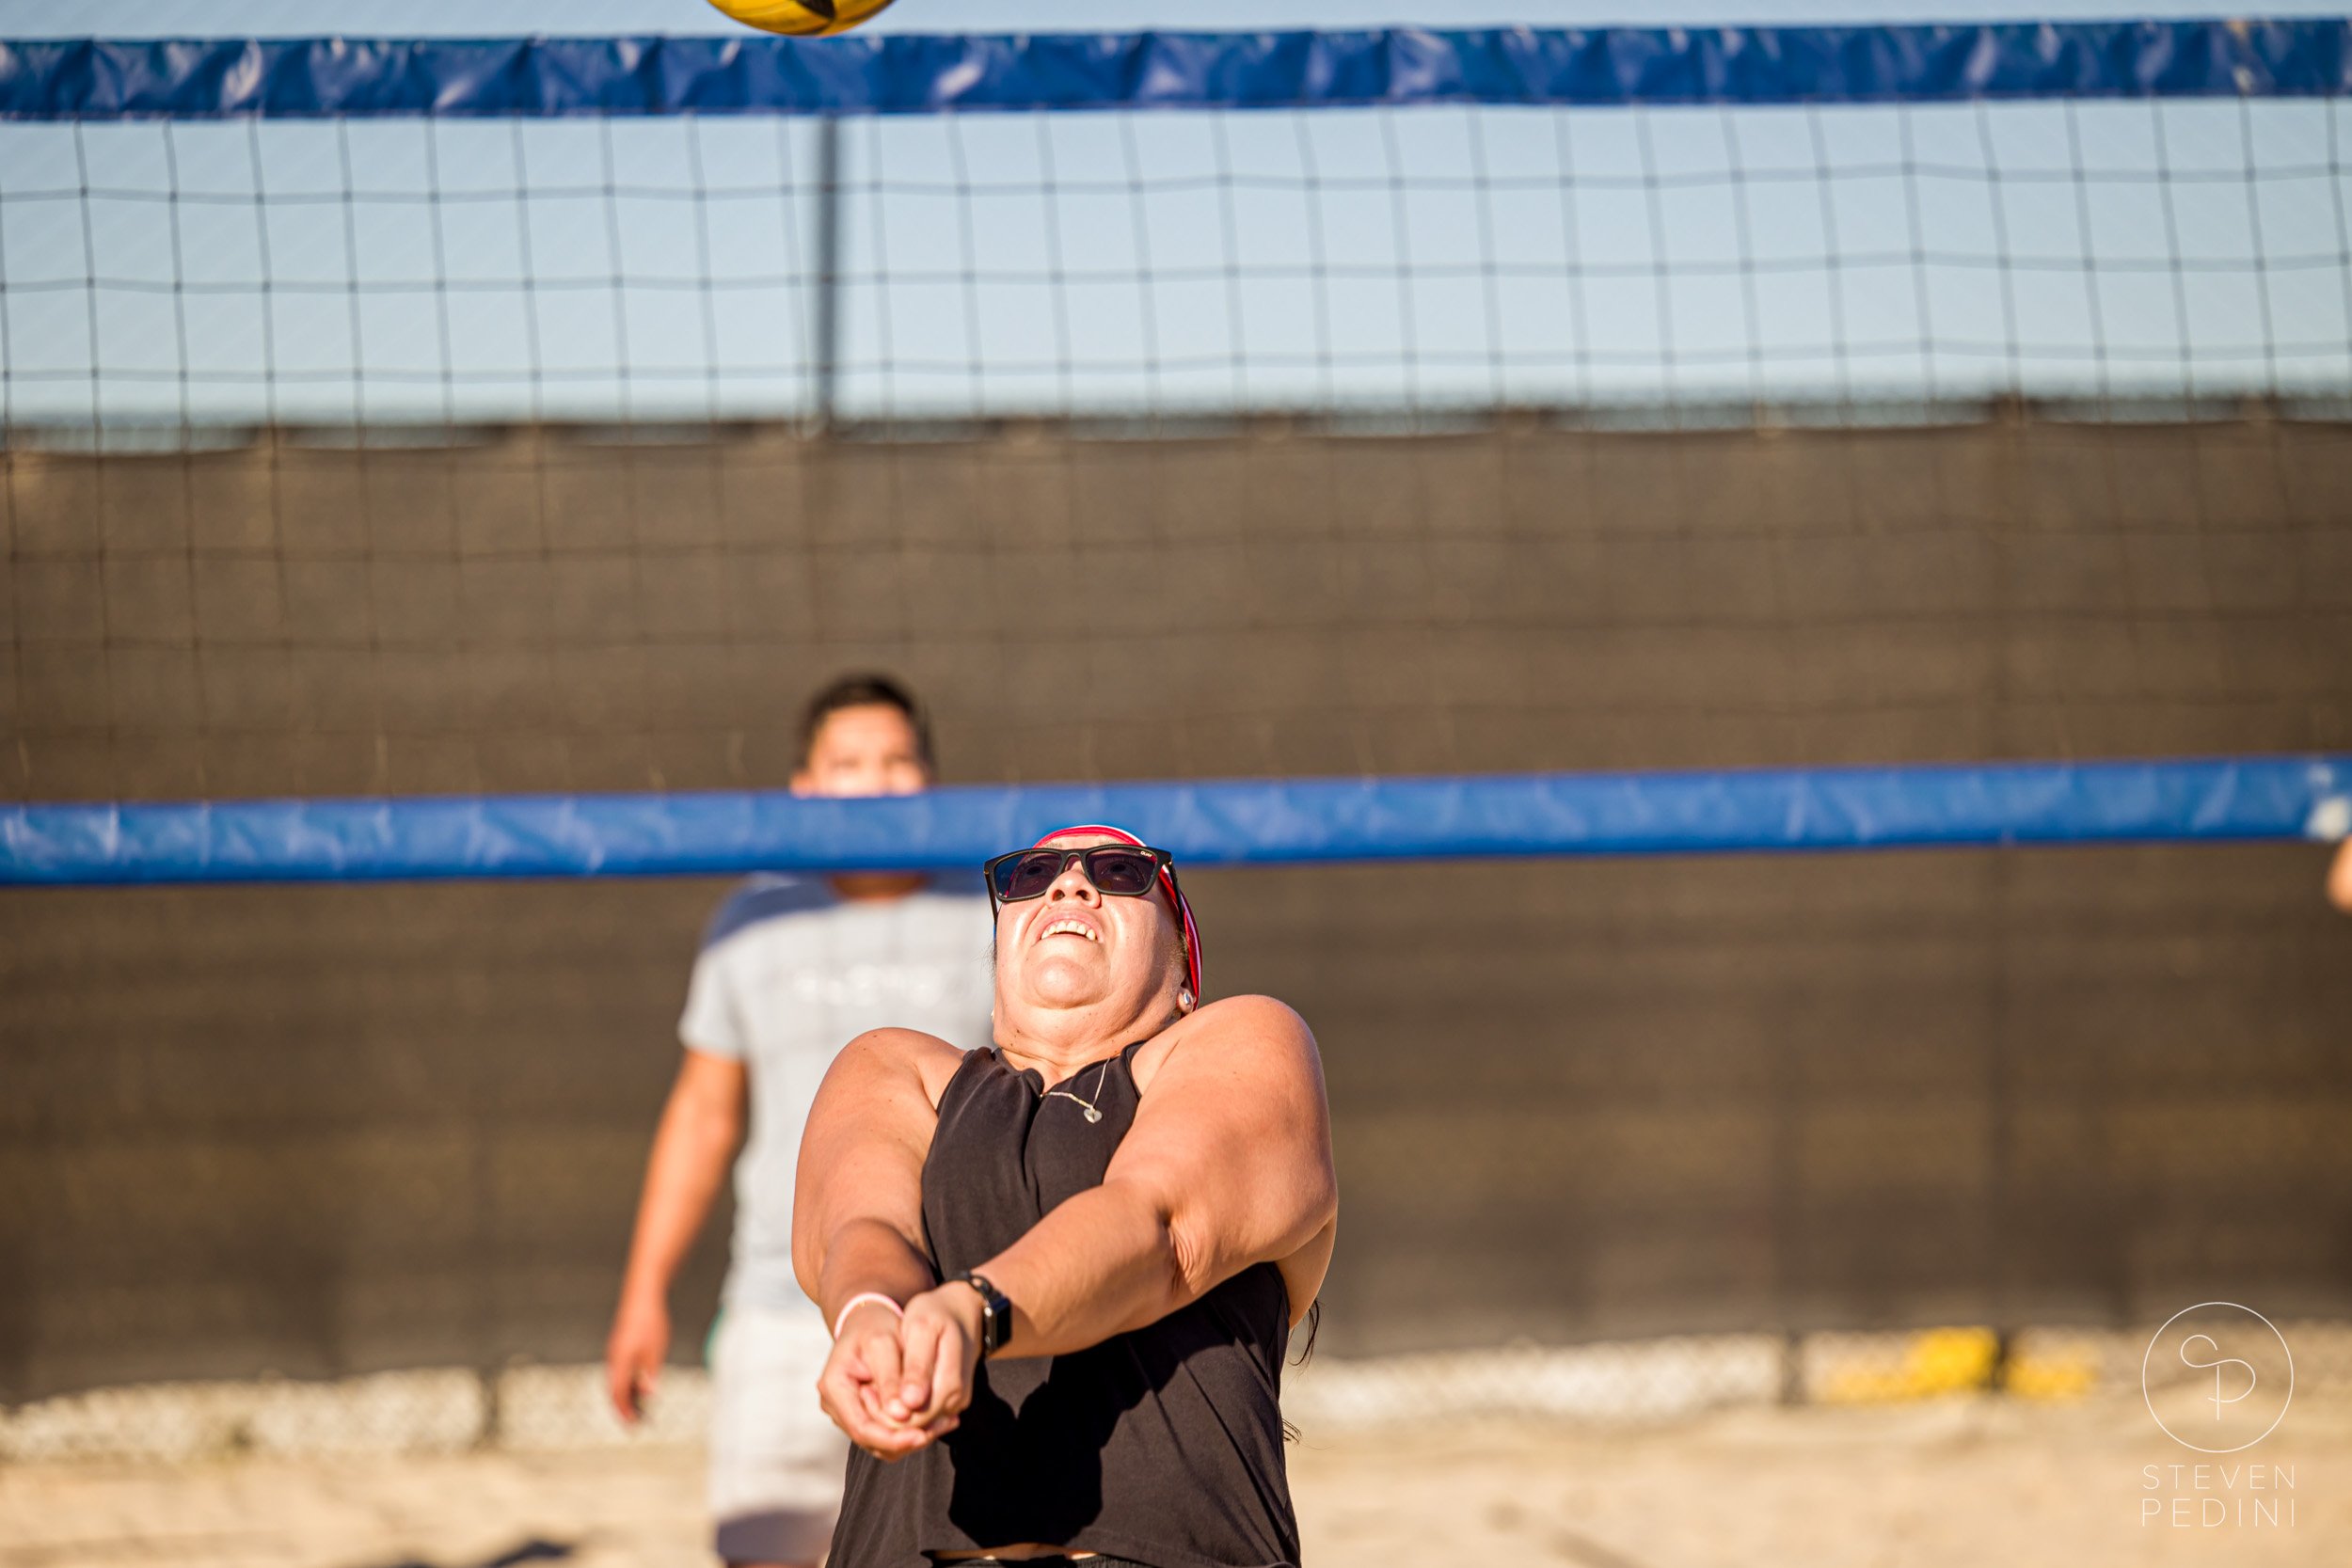 Steven Pedini Photography - Bumpy Pickle - Sand Volleyball - Houston TX - World Cup of Volleyball - 00050.jpg